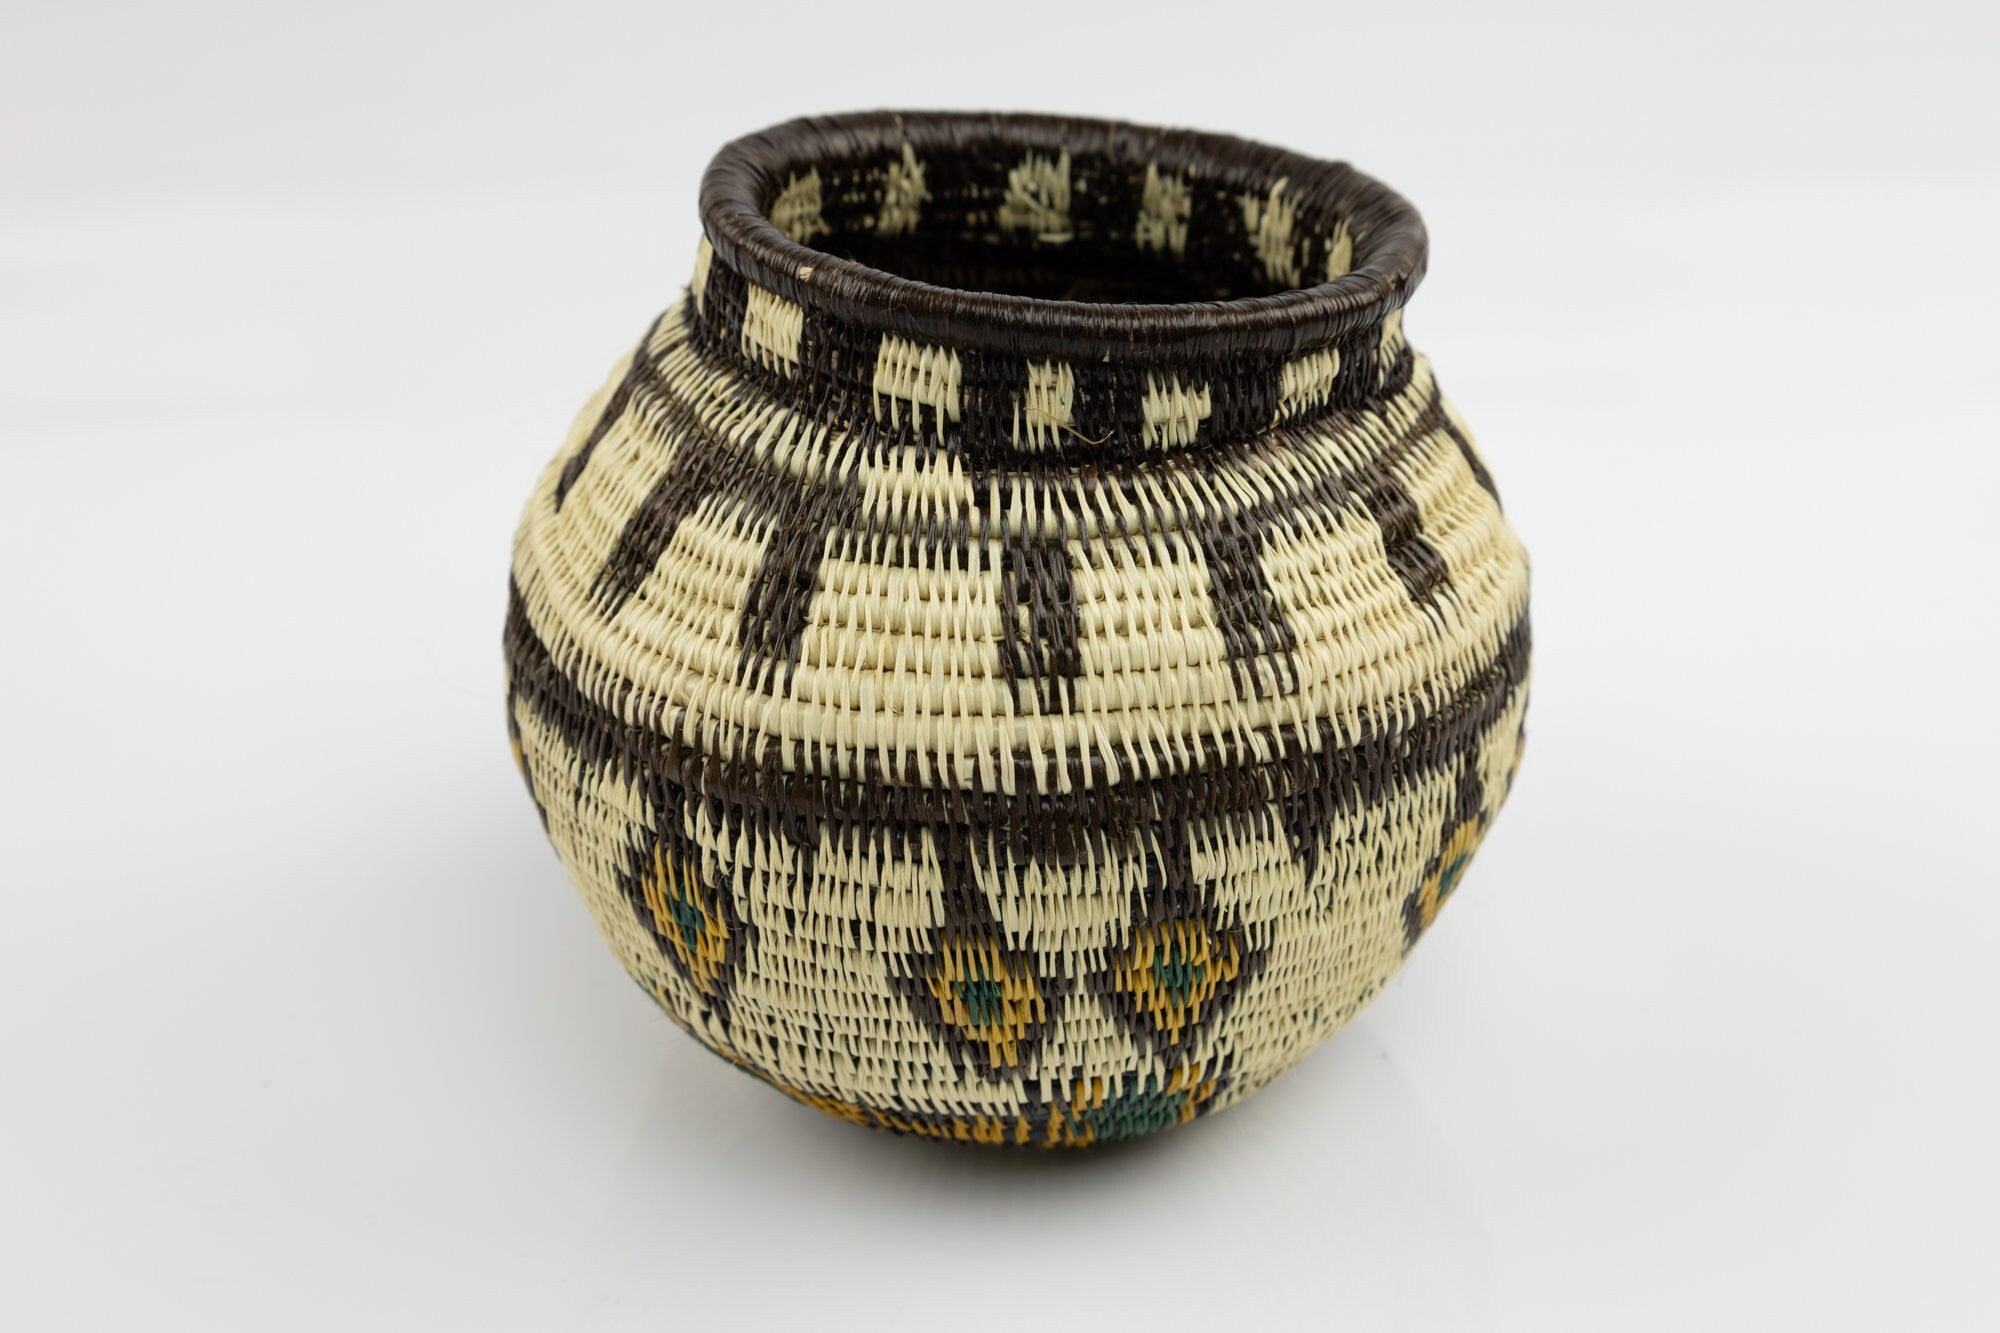 Hand Woven Traditional Basket Made By Wounaan And Emberá Panama Indians. Bowl Basket, Woven Basket, Basket Decor, Woven Storage